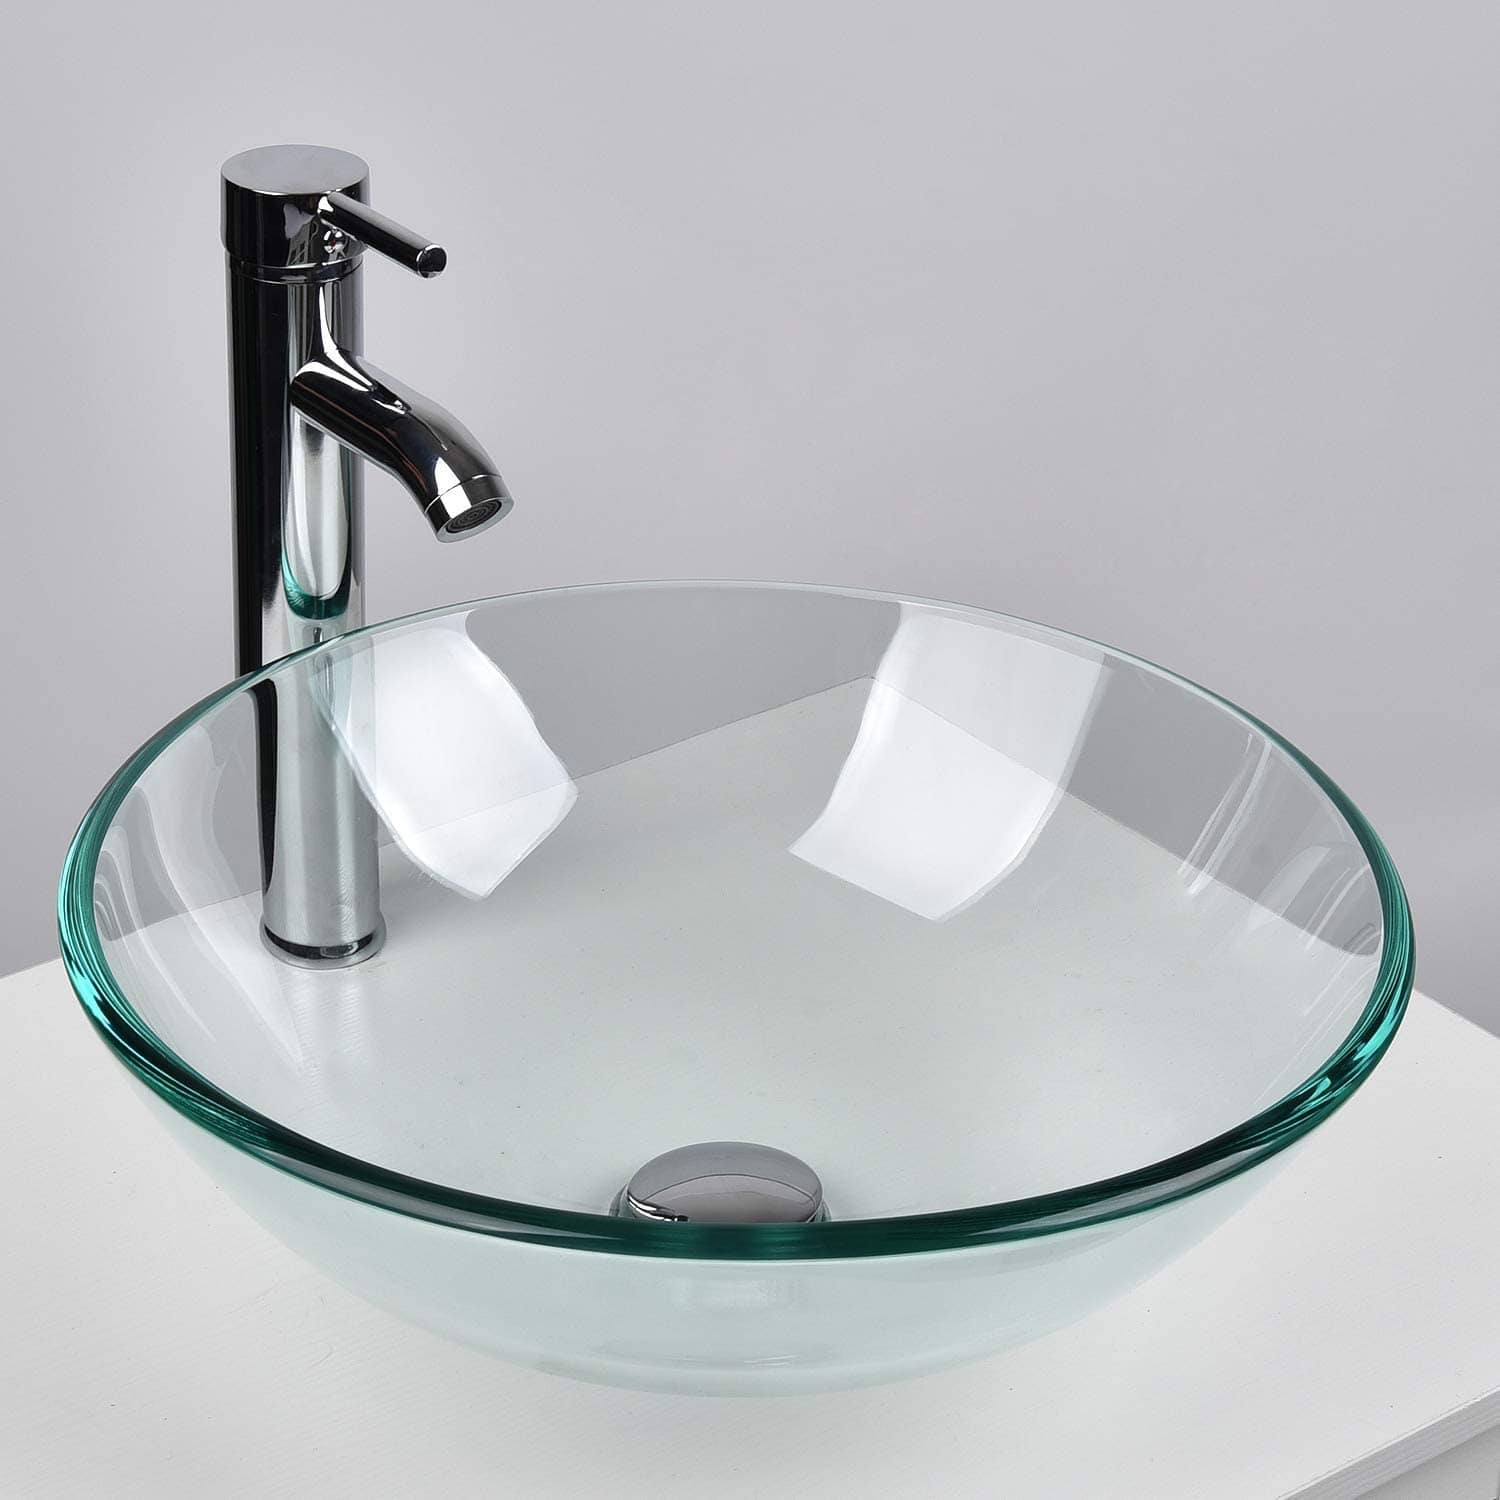 Elecwish Clear Tempered Glass Round Vessel Sink BA20061